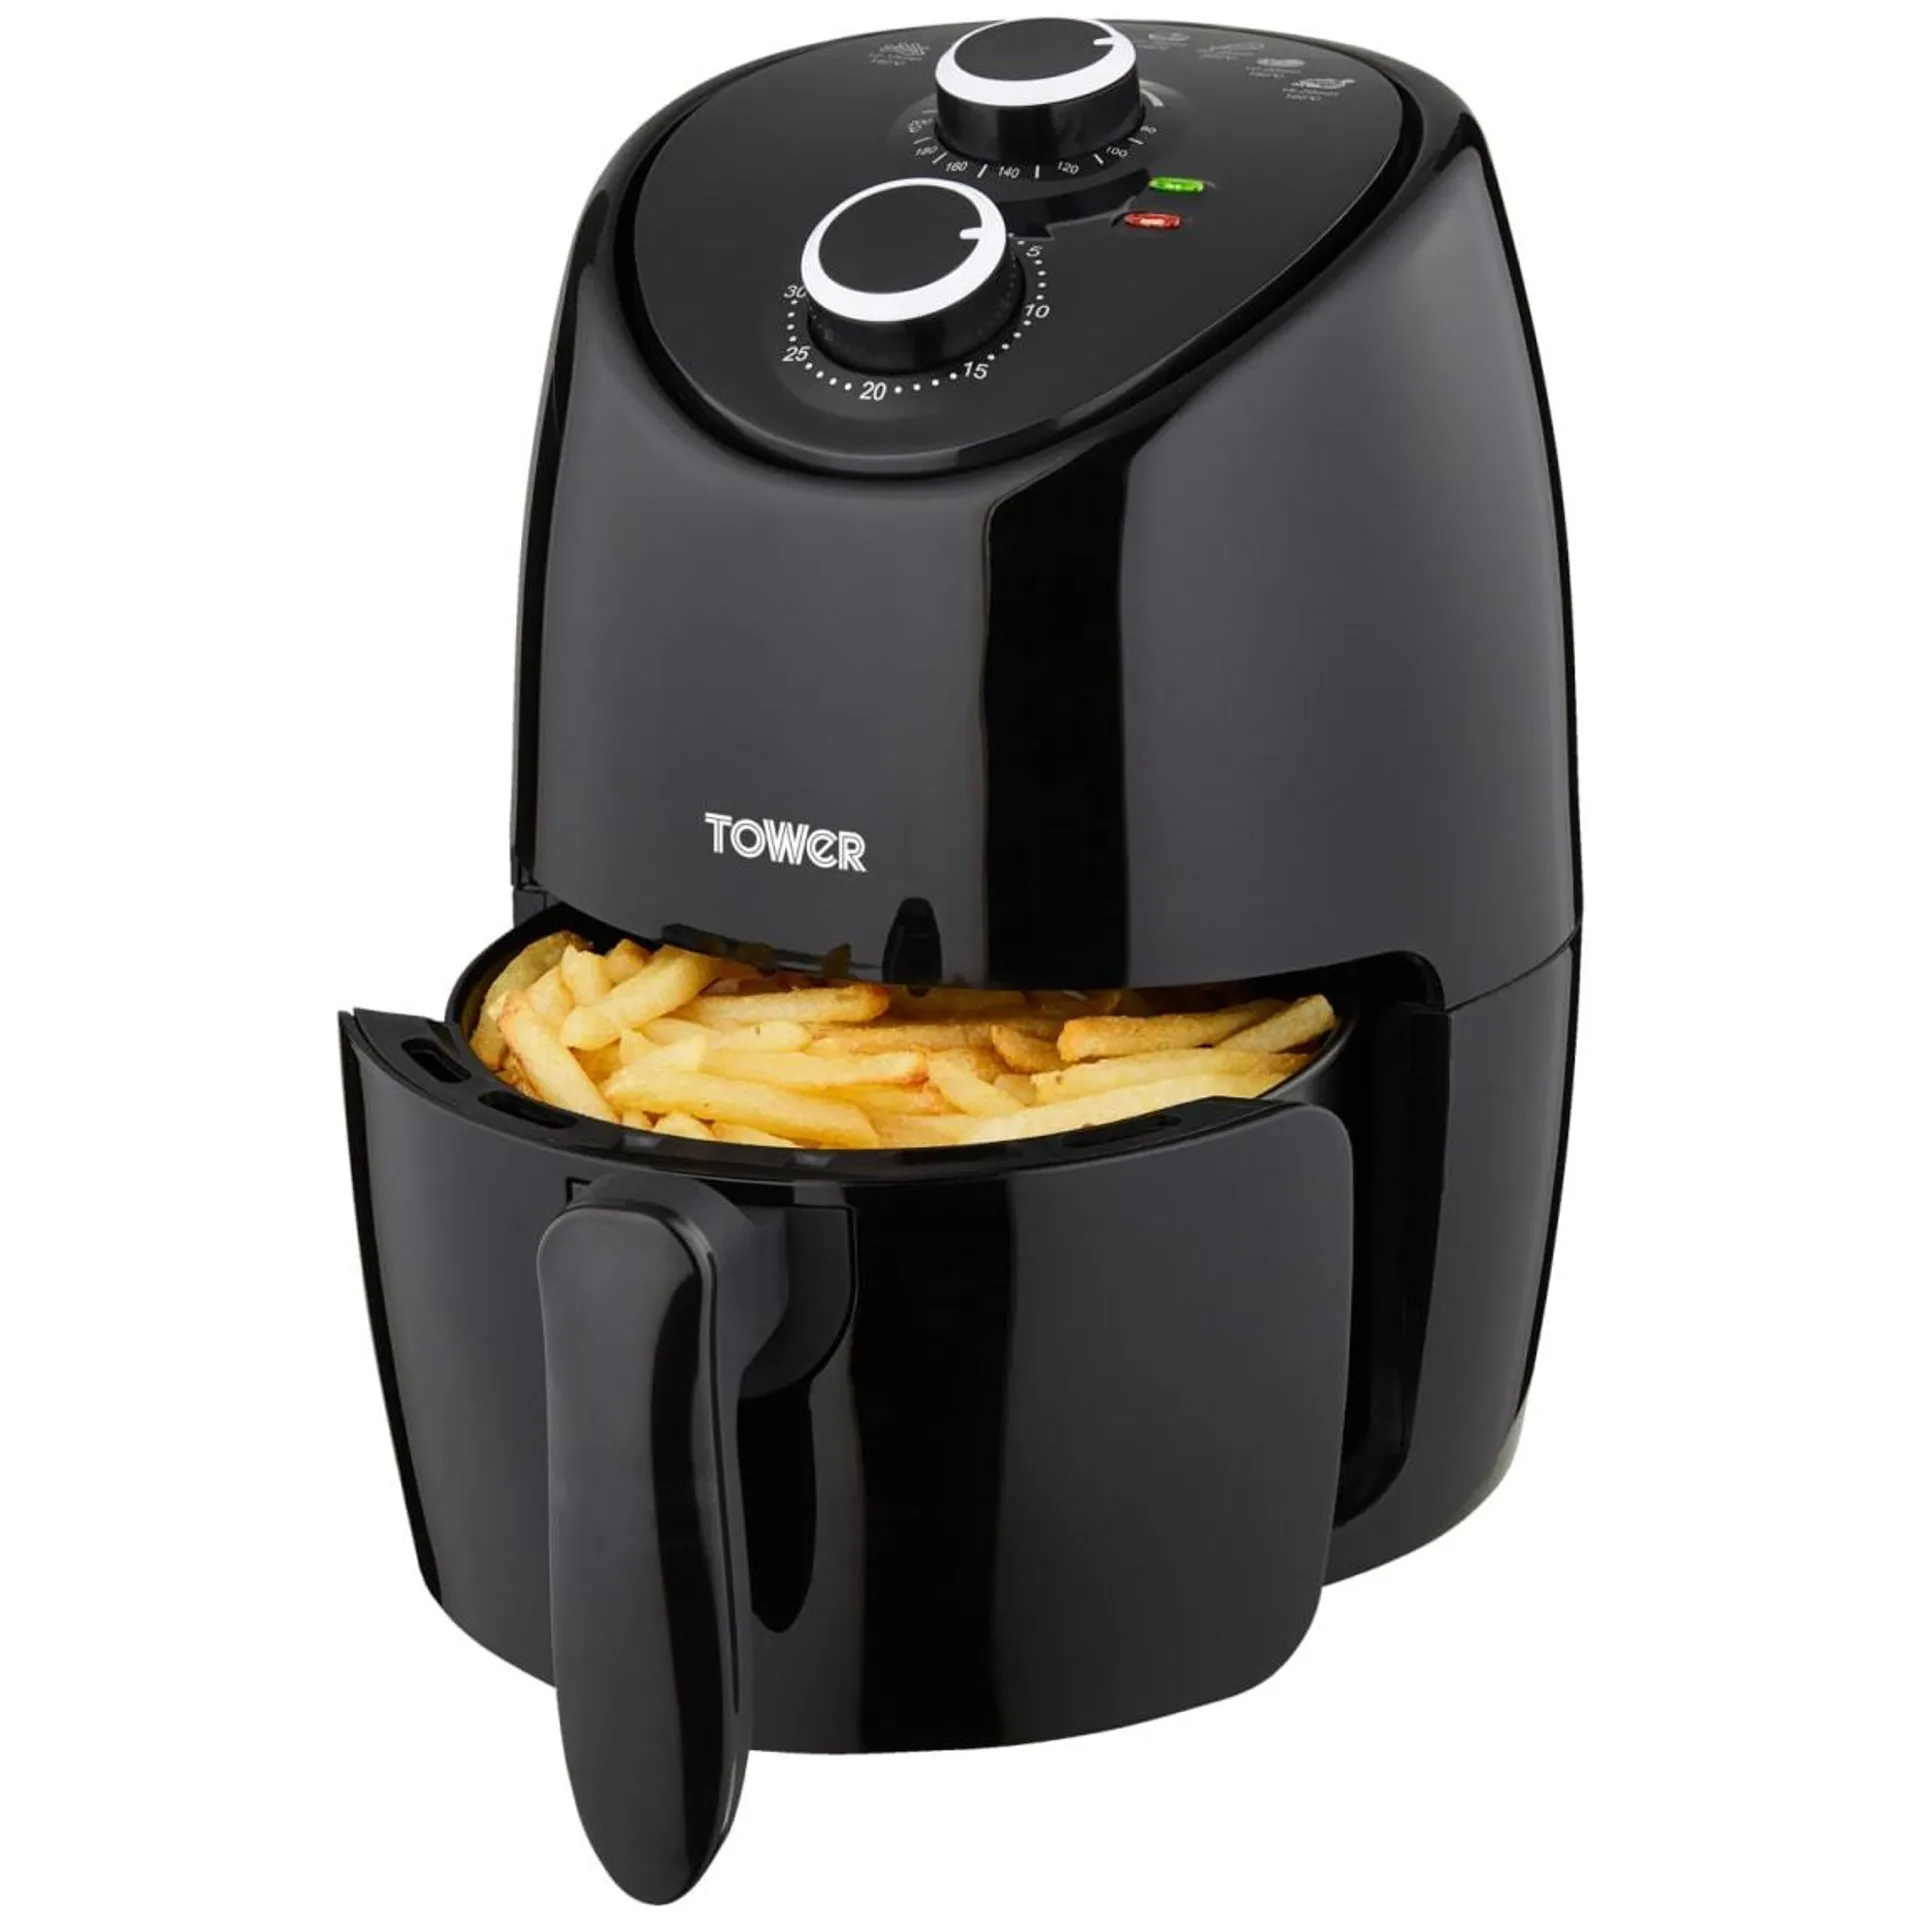 Tower Compact Air Fryer 2L